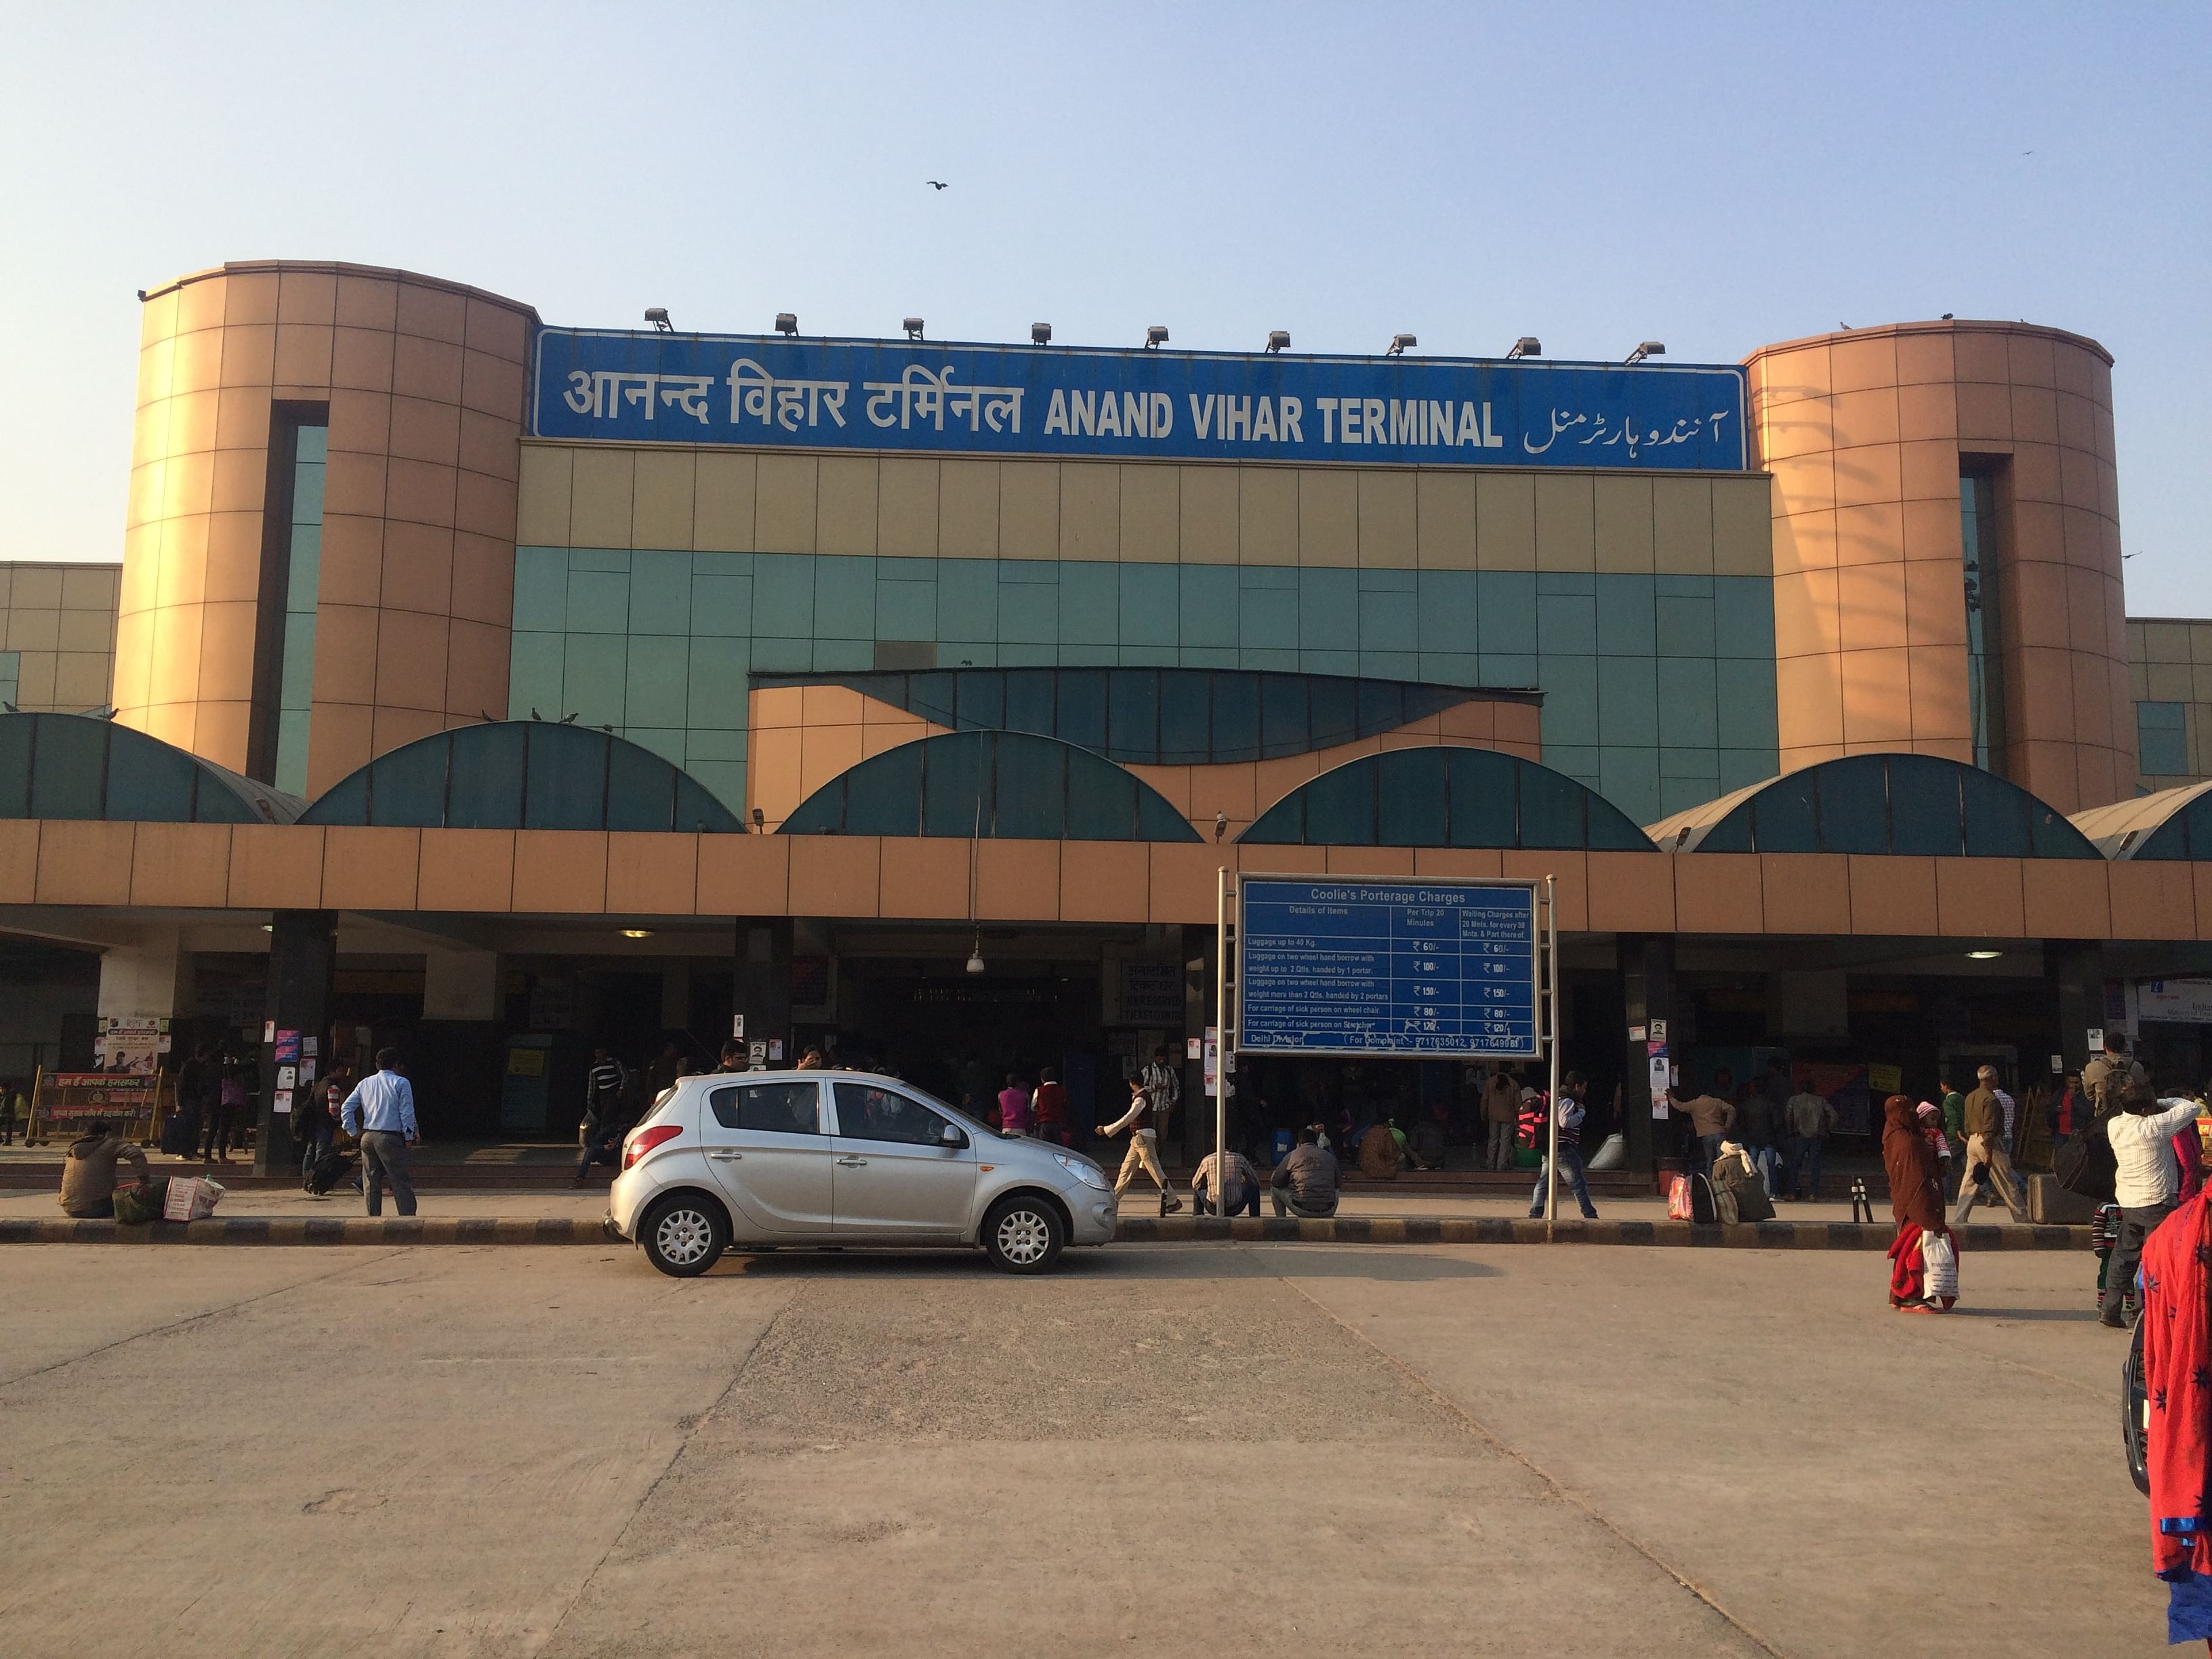 Indian railways launched new initiative for free platform tickets at anand vihar railway station